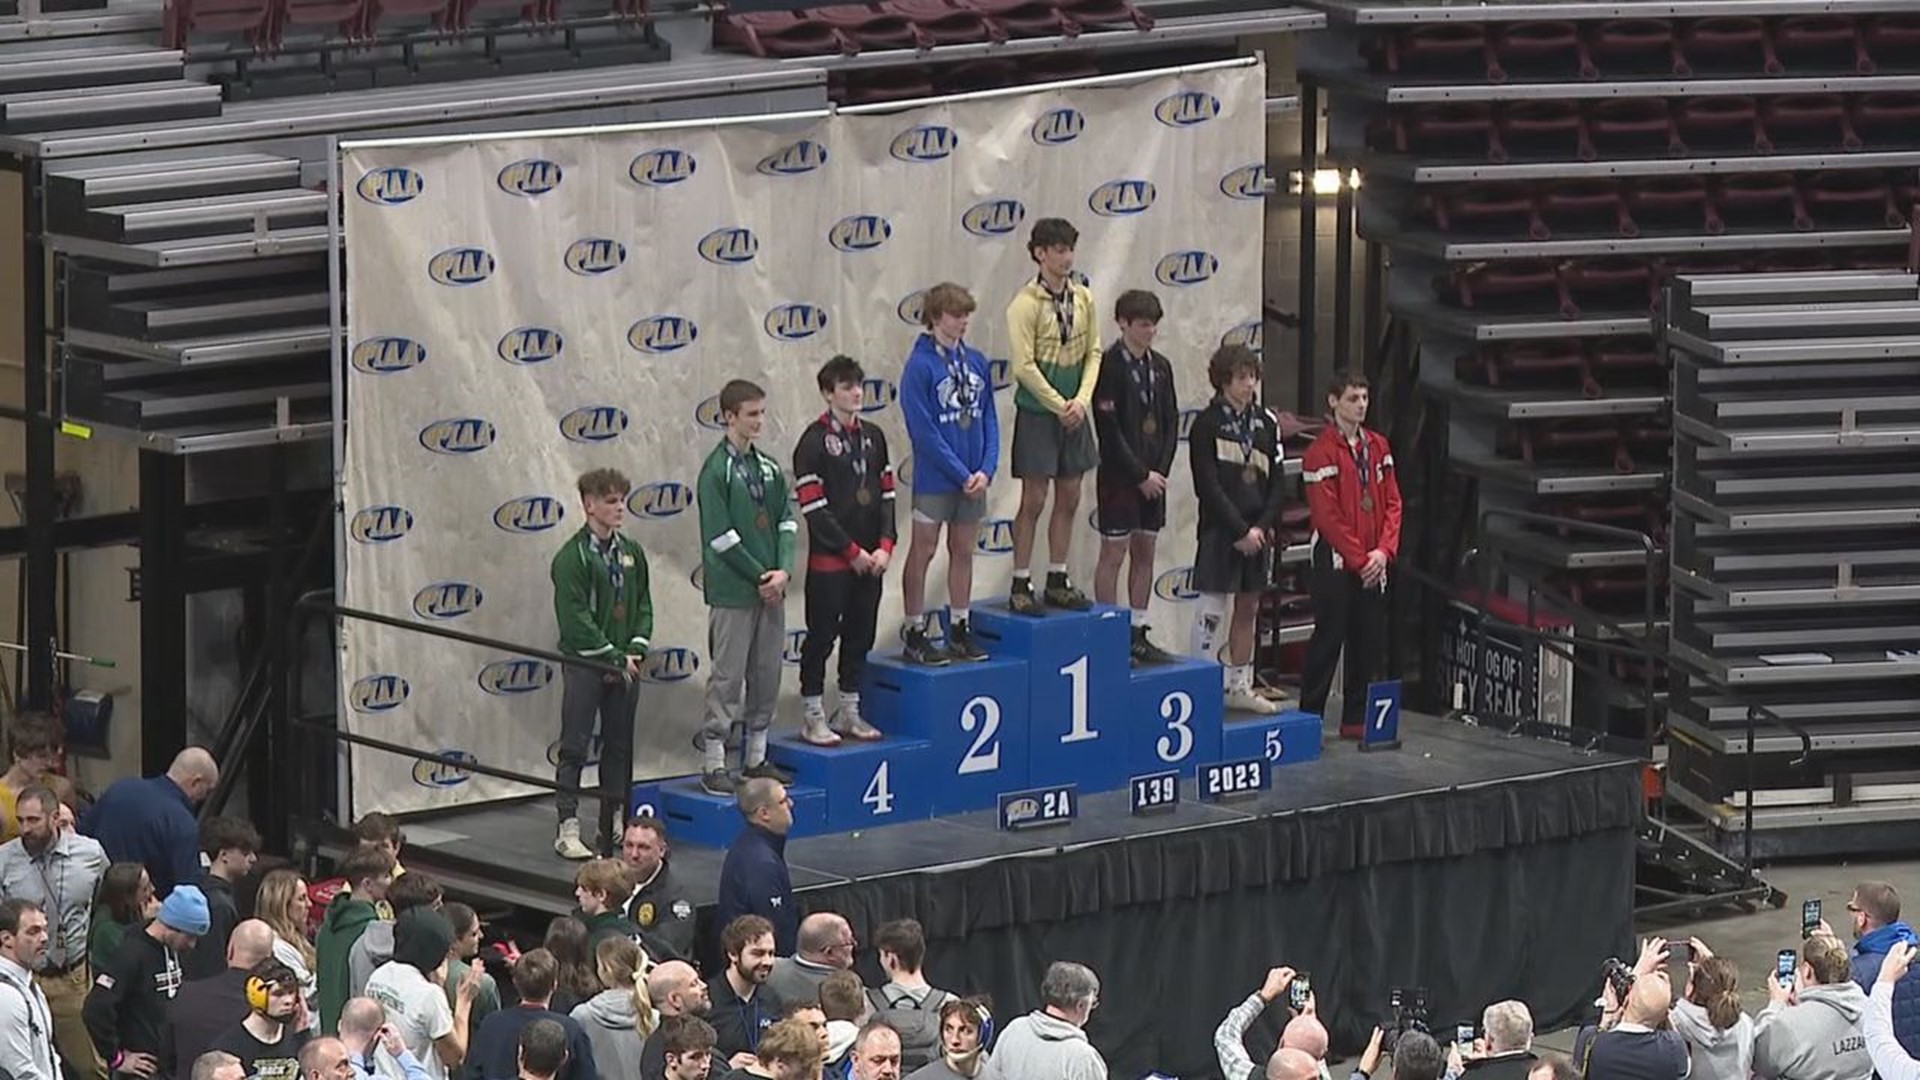 State Wrestling Champions from Northeast and Central Pennsylvania Reflect on Winning PIAA Titles